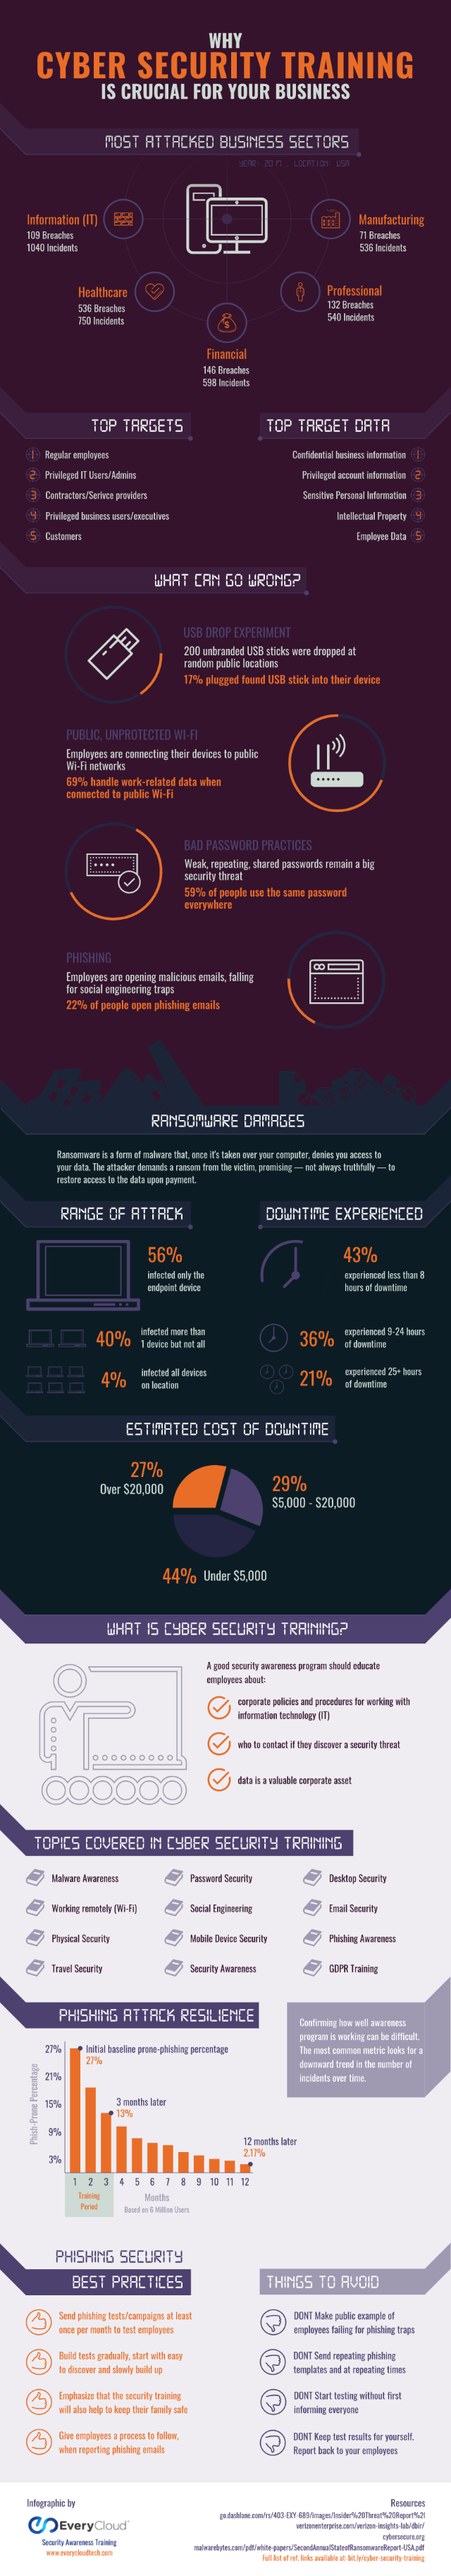 Cybersecurity training infographic